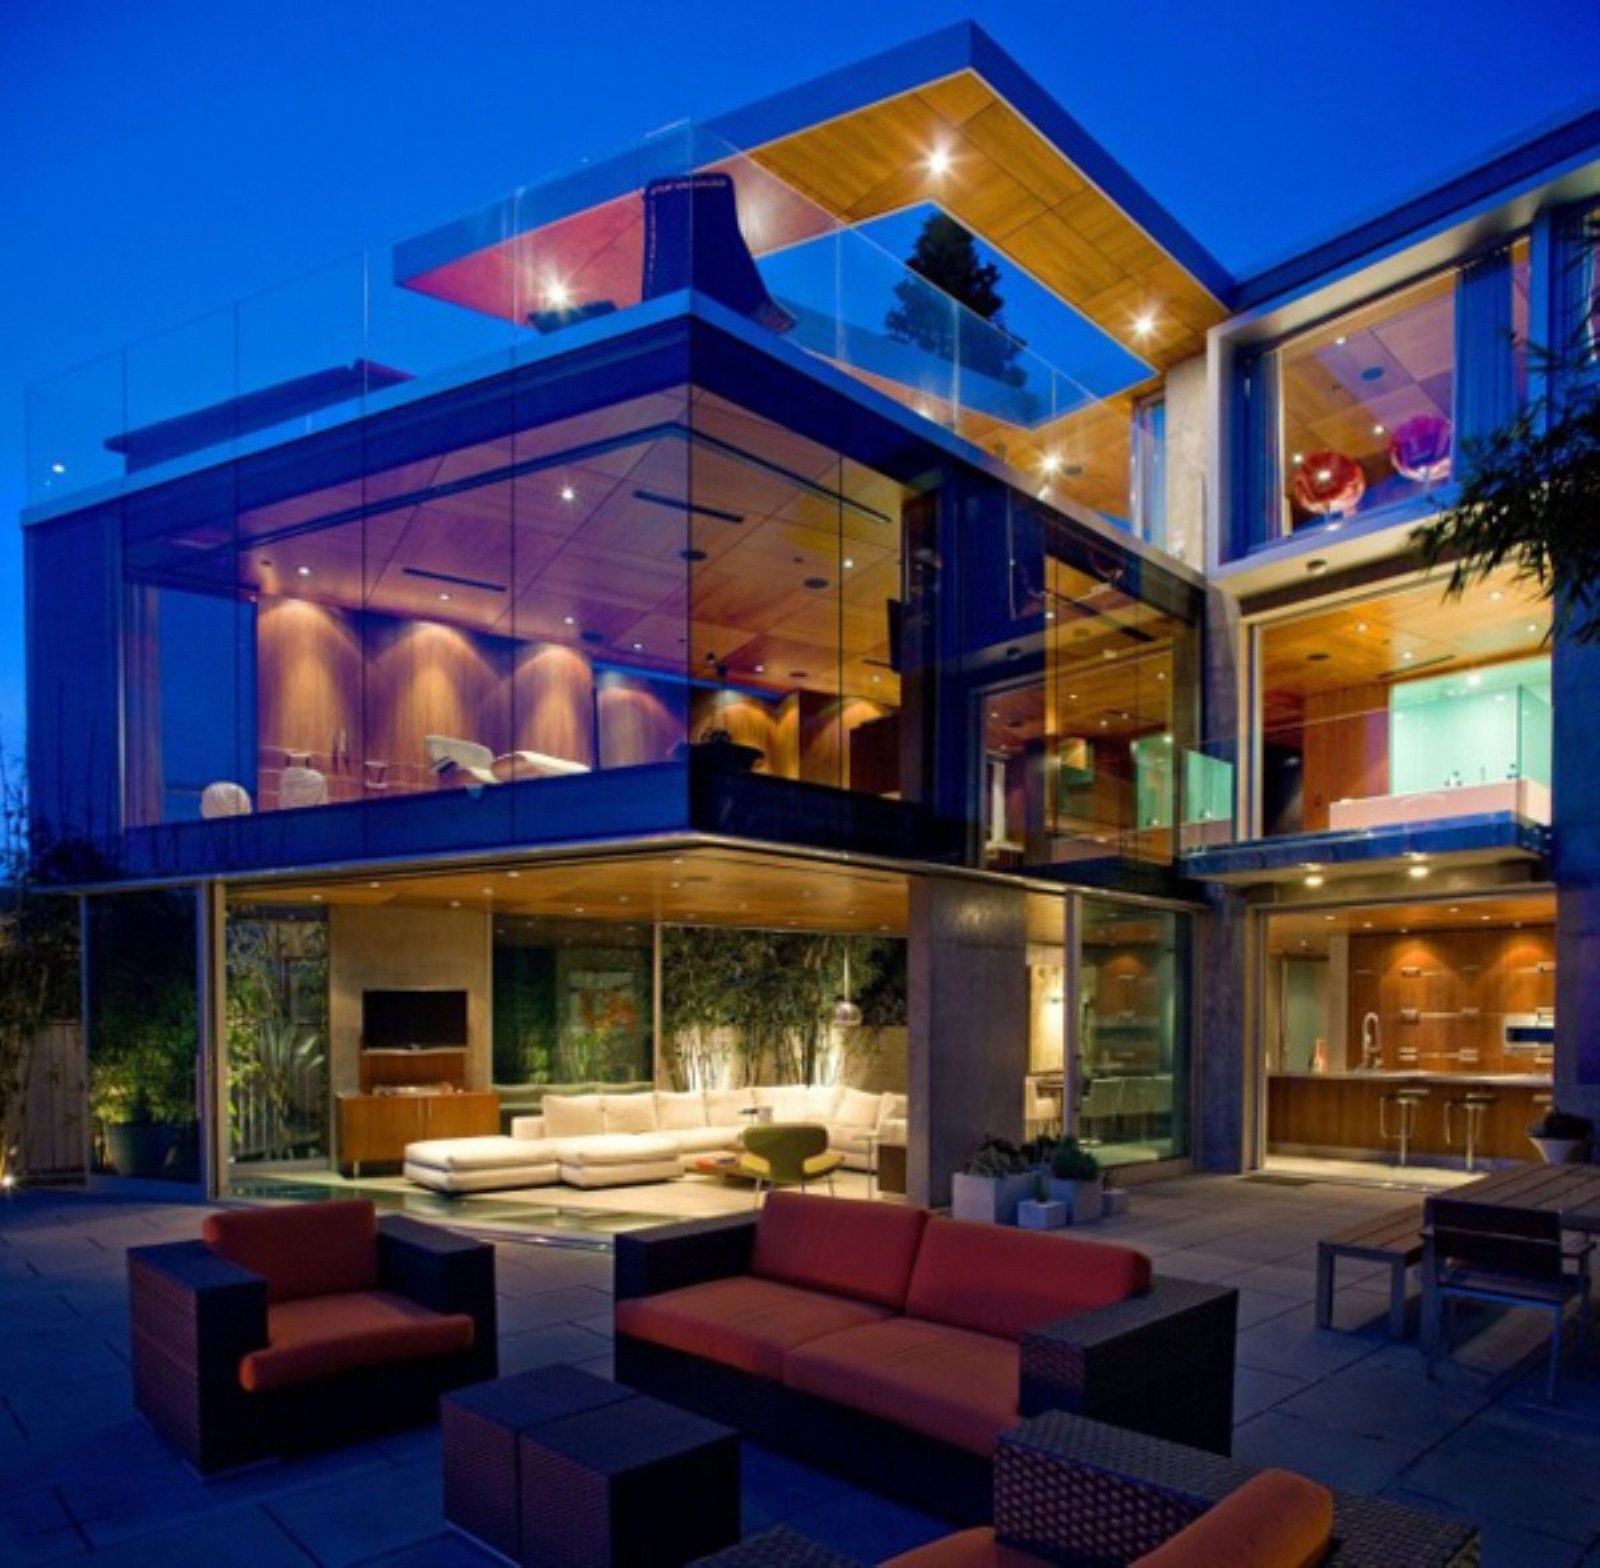 exterior-interior-furniture-modern-home-exotic-house-decorated-with-glass-wall-design-ultra-modern-house1